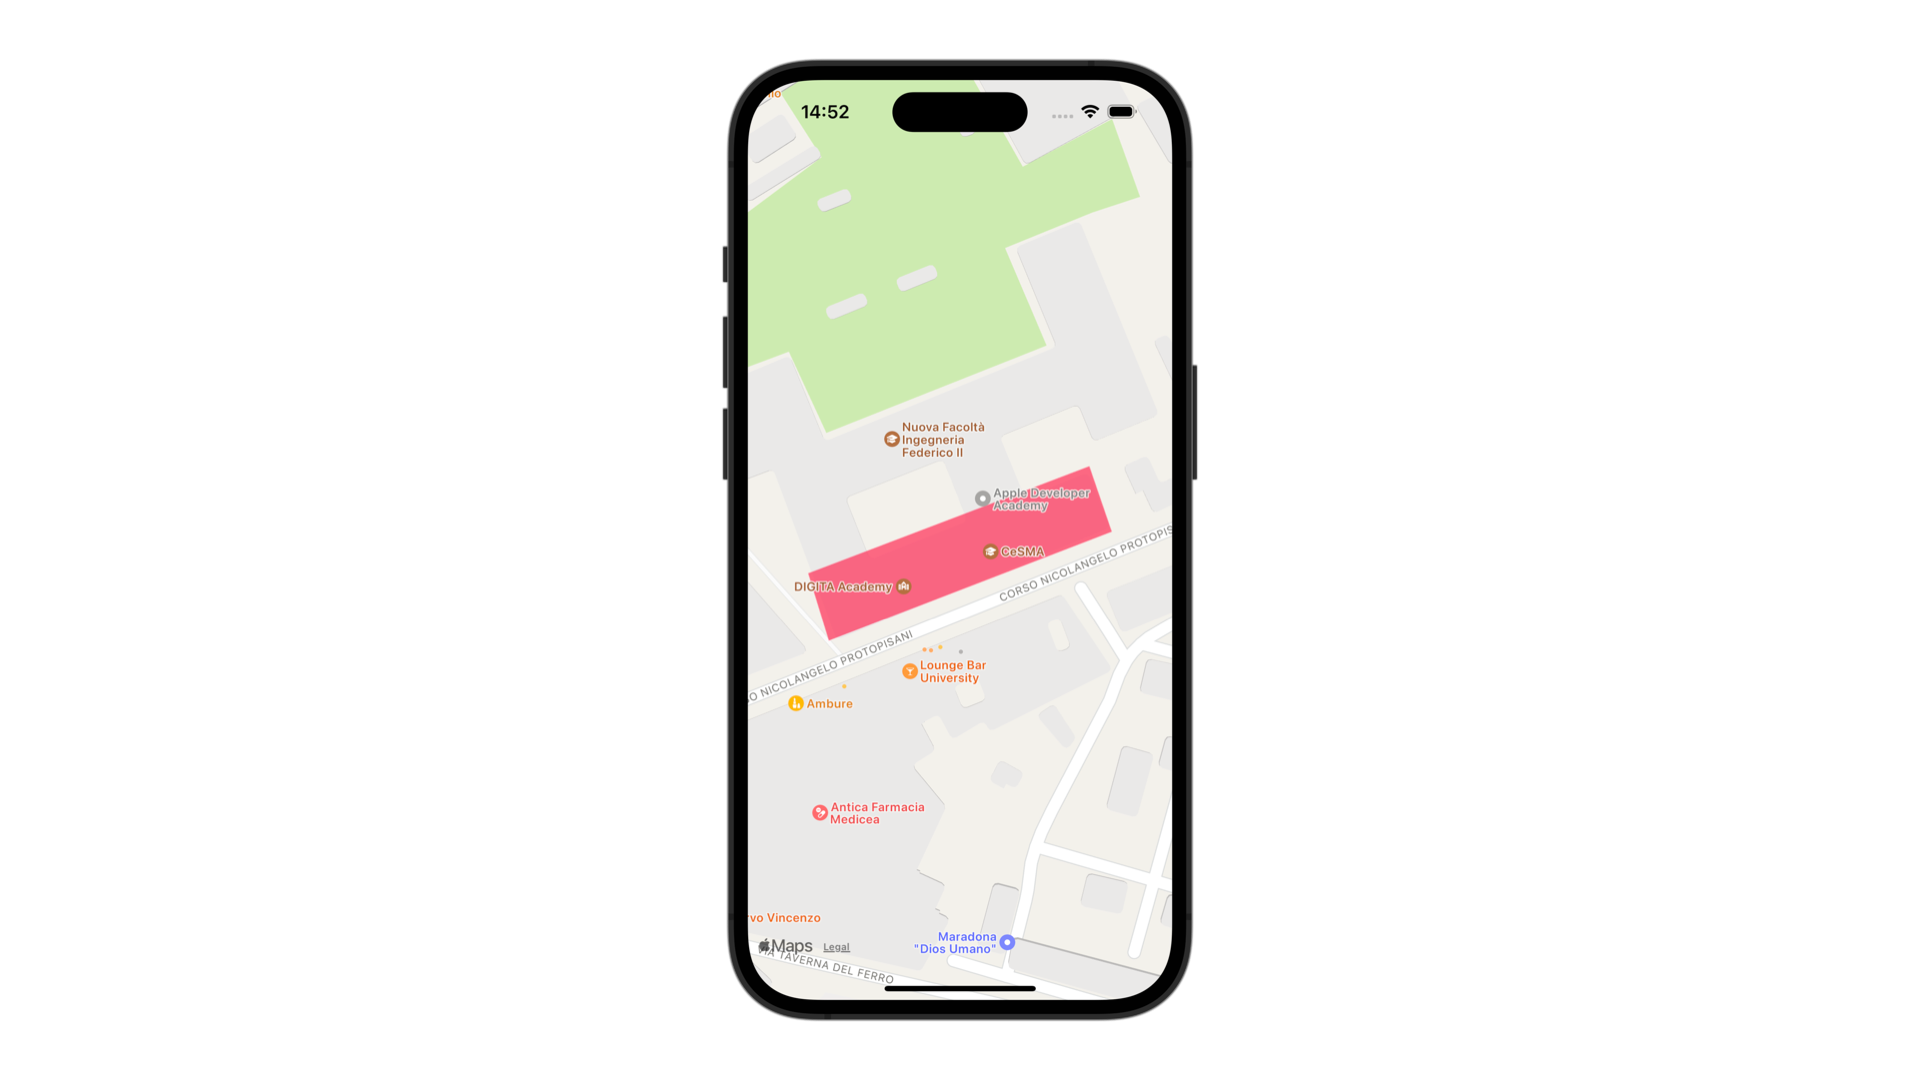 Using MapPolygon overlays in MapKit with SwiftUI